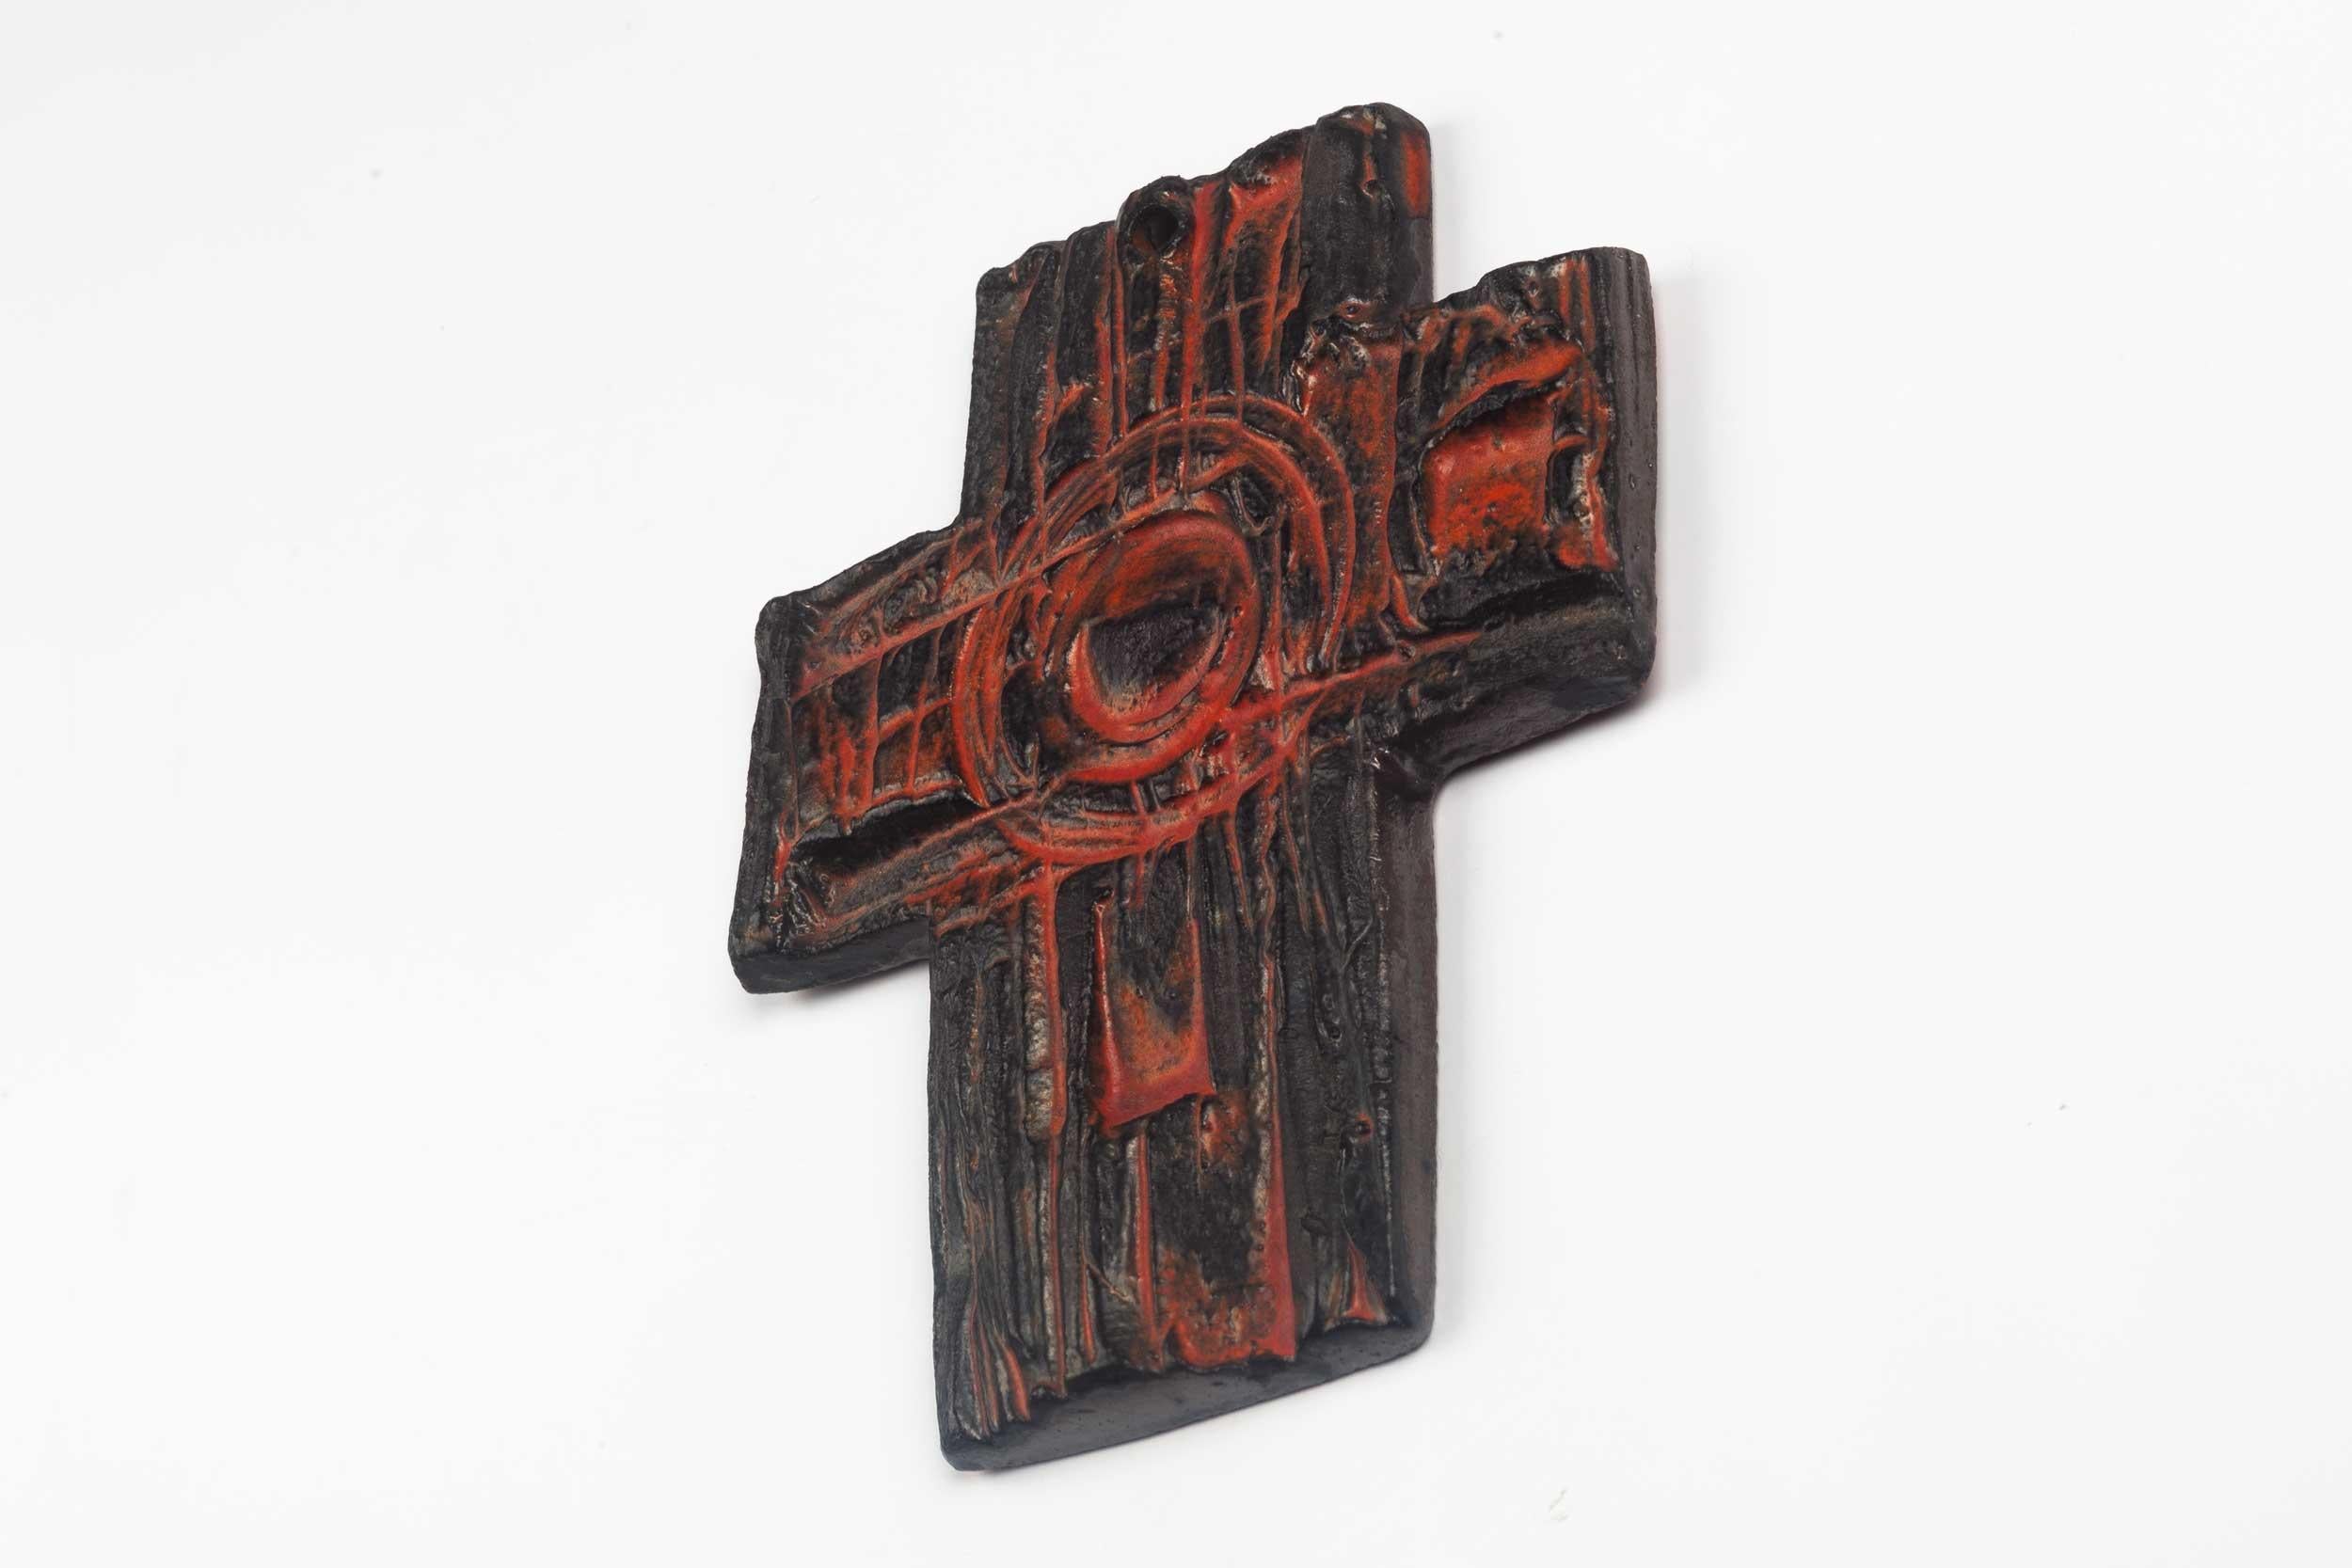 Belgian Midcentury European Wall Cross, Hand Painted Textured Ceramic, 1970s For Sale